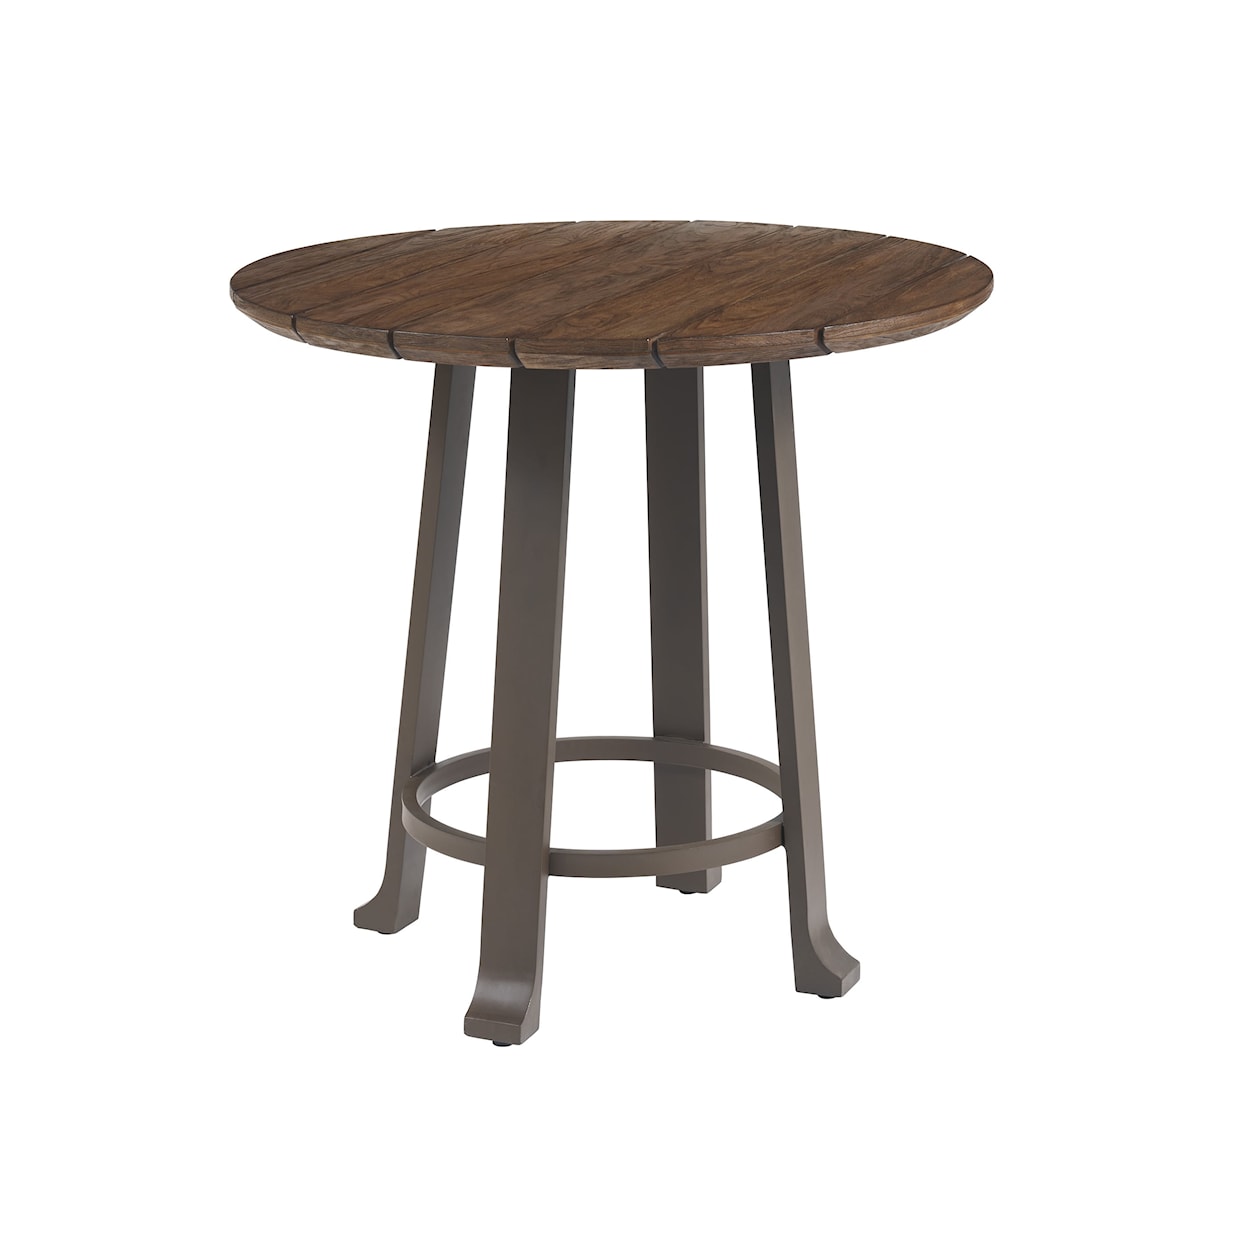 Tommy Bahama Outdoor Living Kilimanjaro Round Bistro Table